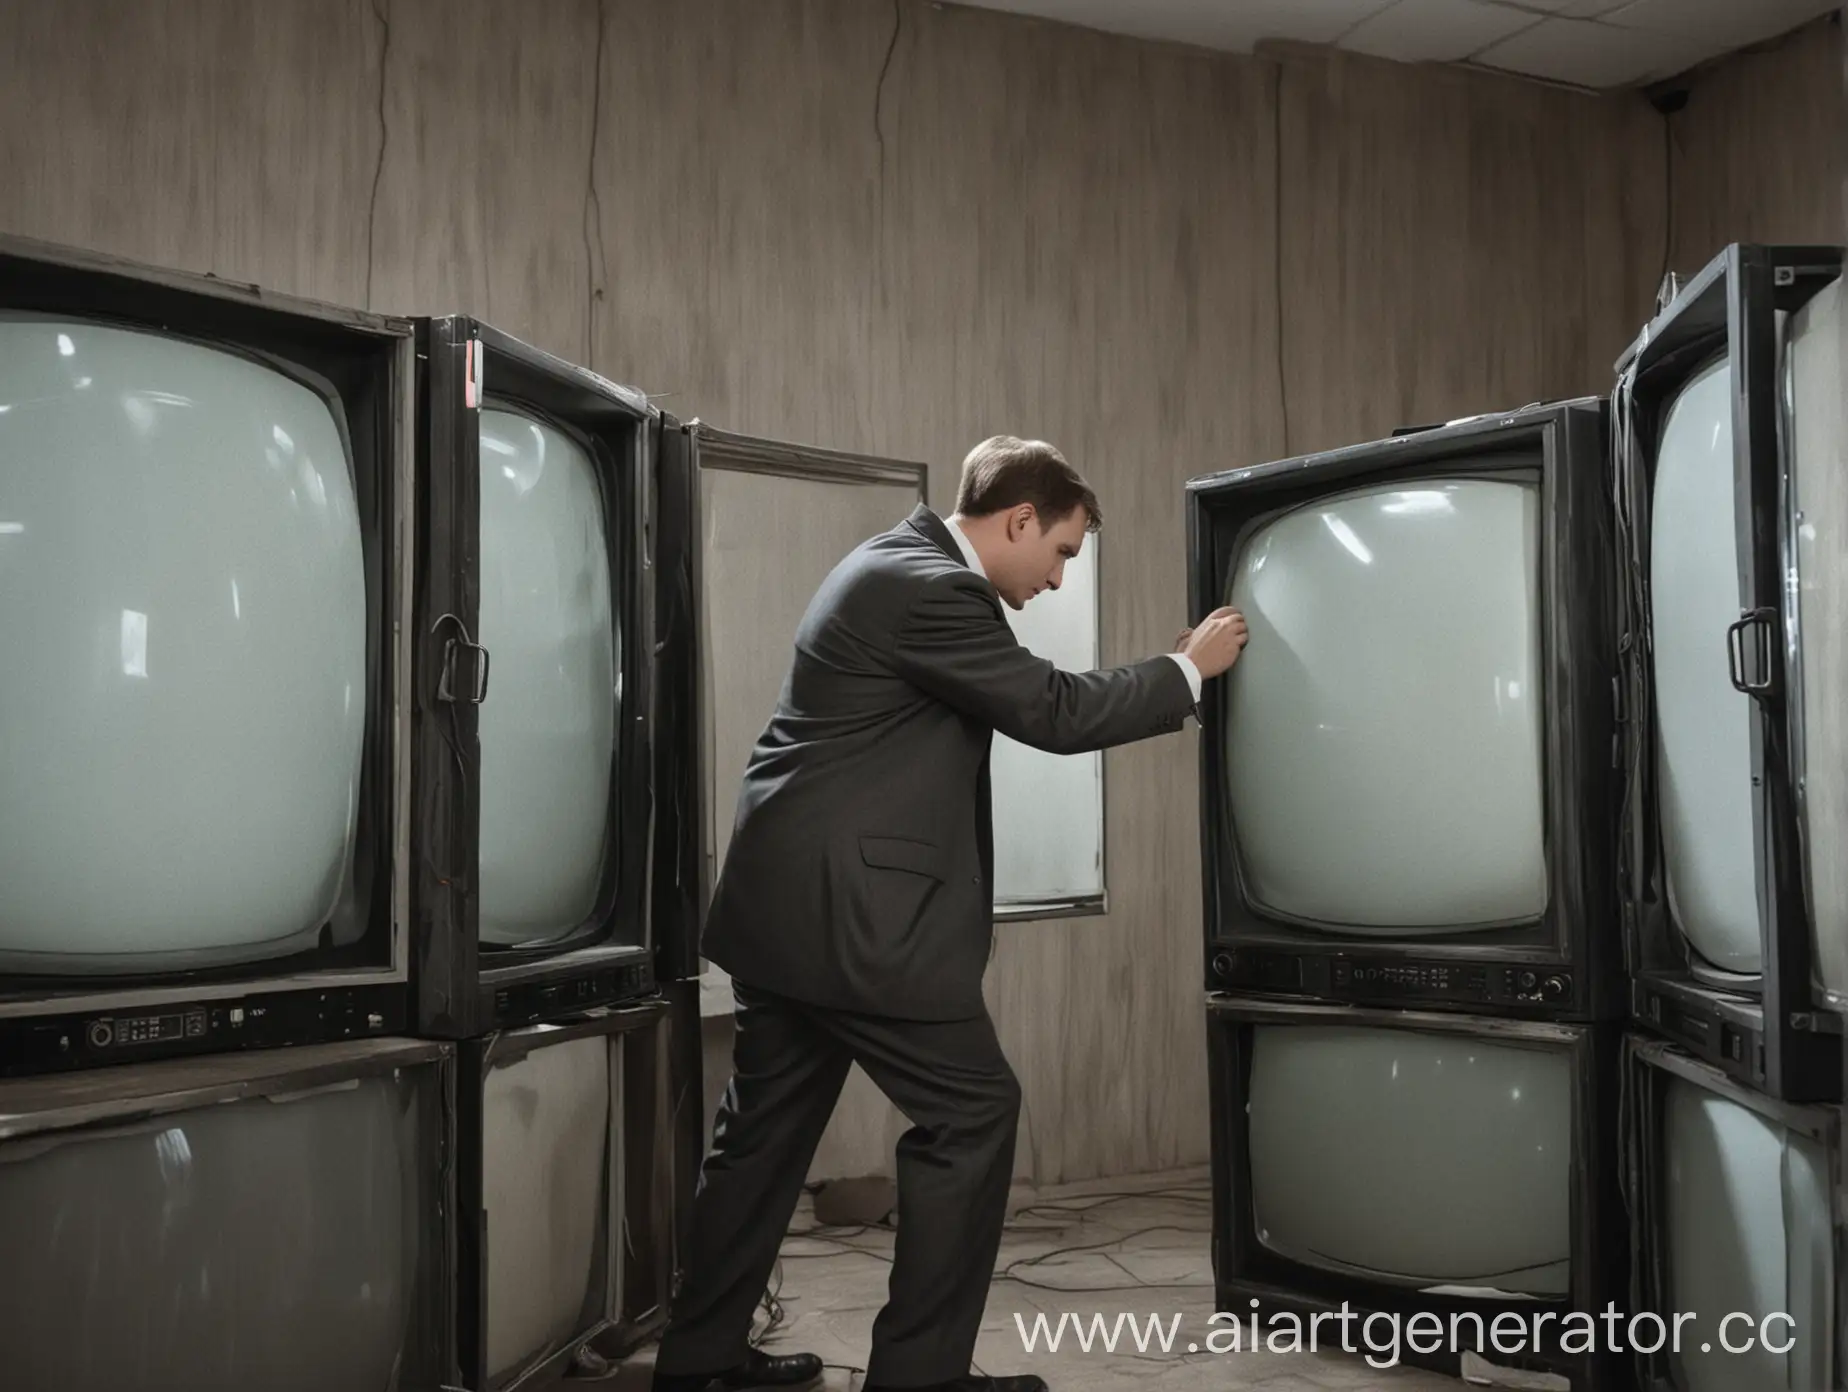 Man-Climbing-Out-of-Soviet-Televisions-in-Official-Suit-and-Jacket